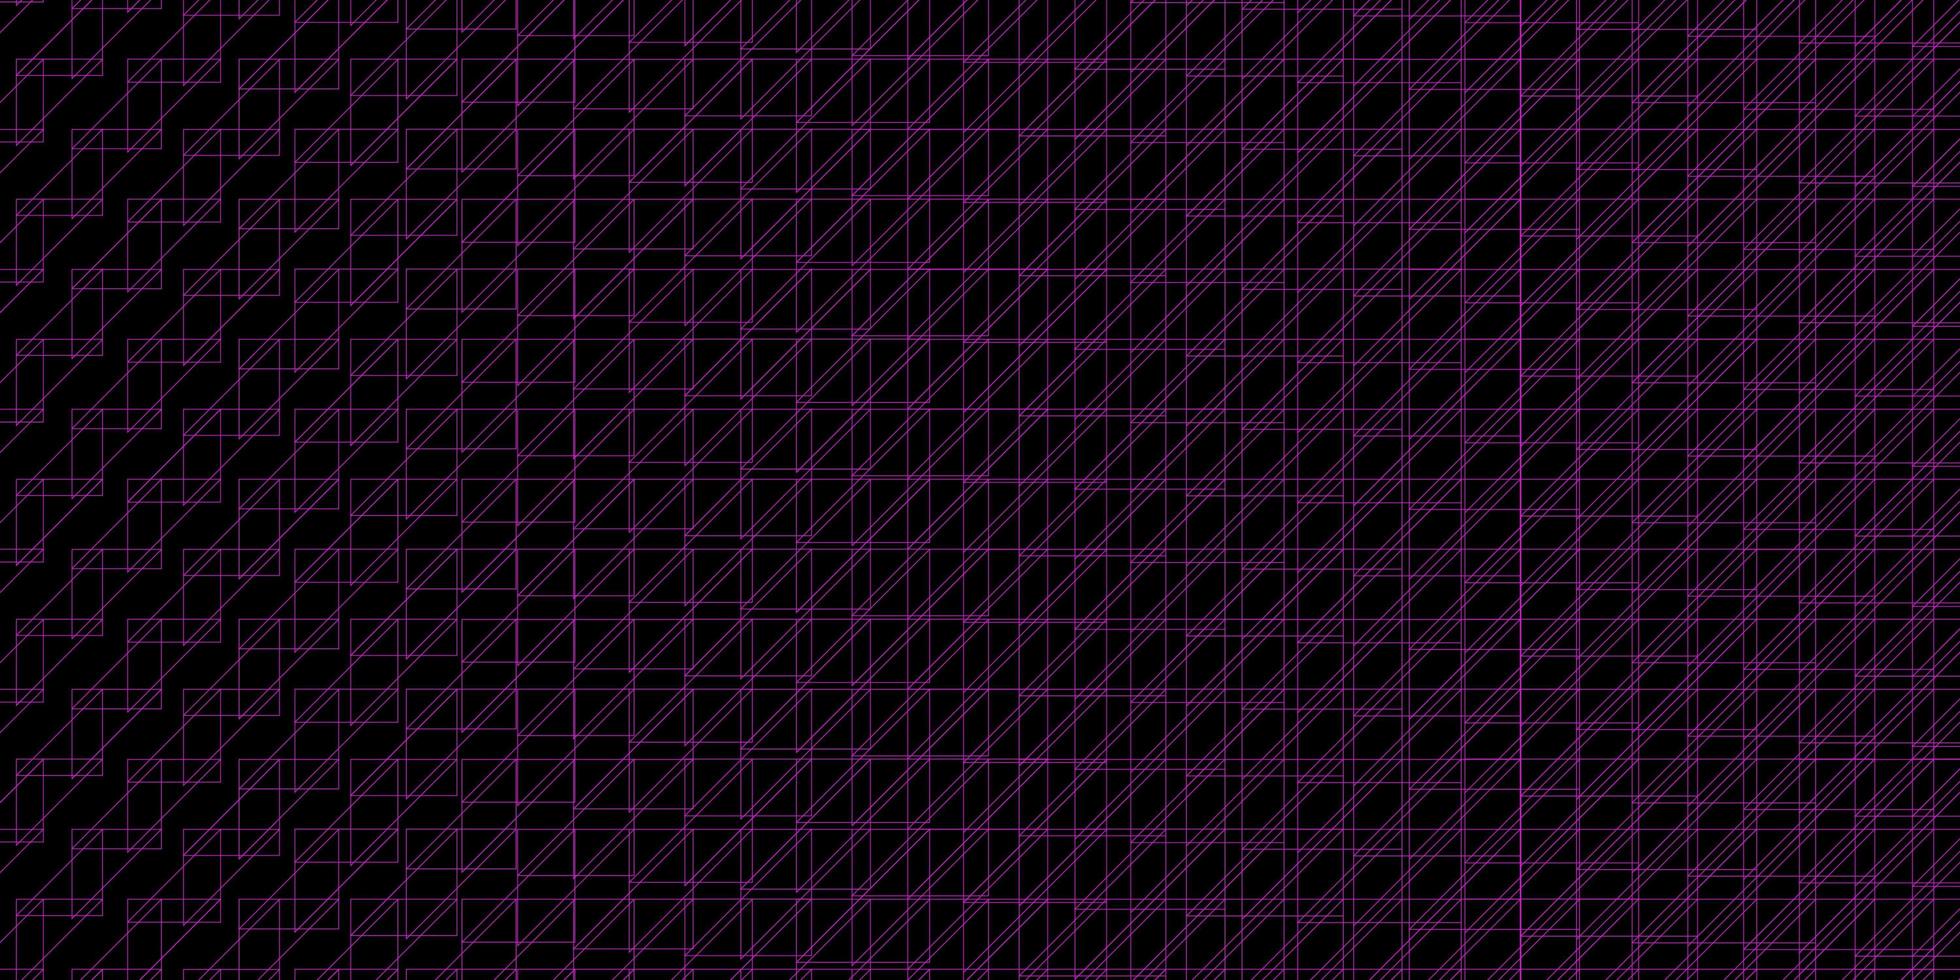 Dark Pink vector layout with lines. Modern abstract illustration with colorful lines. Pattern for websites, landing pages.